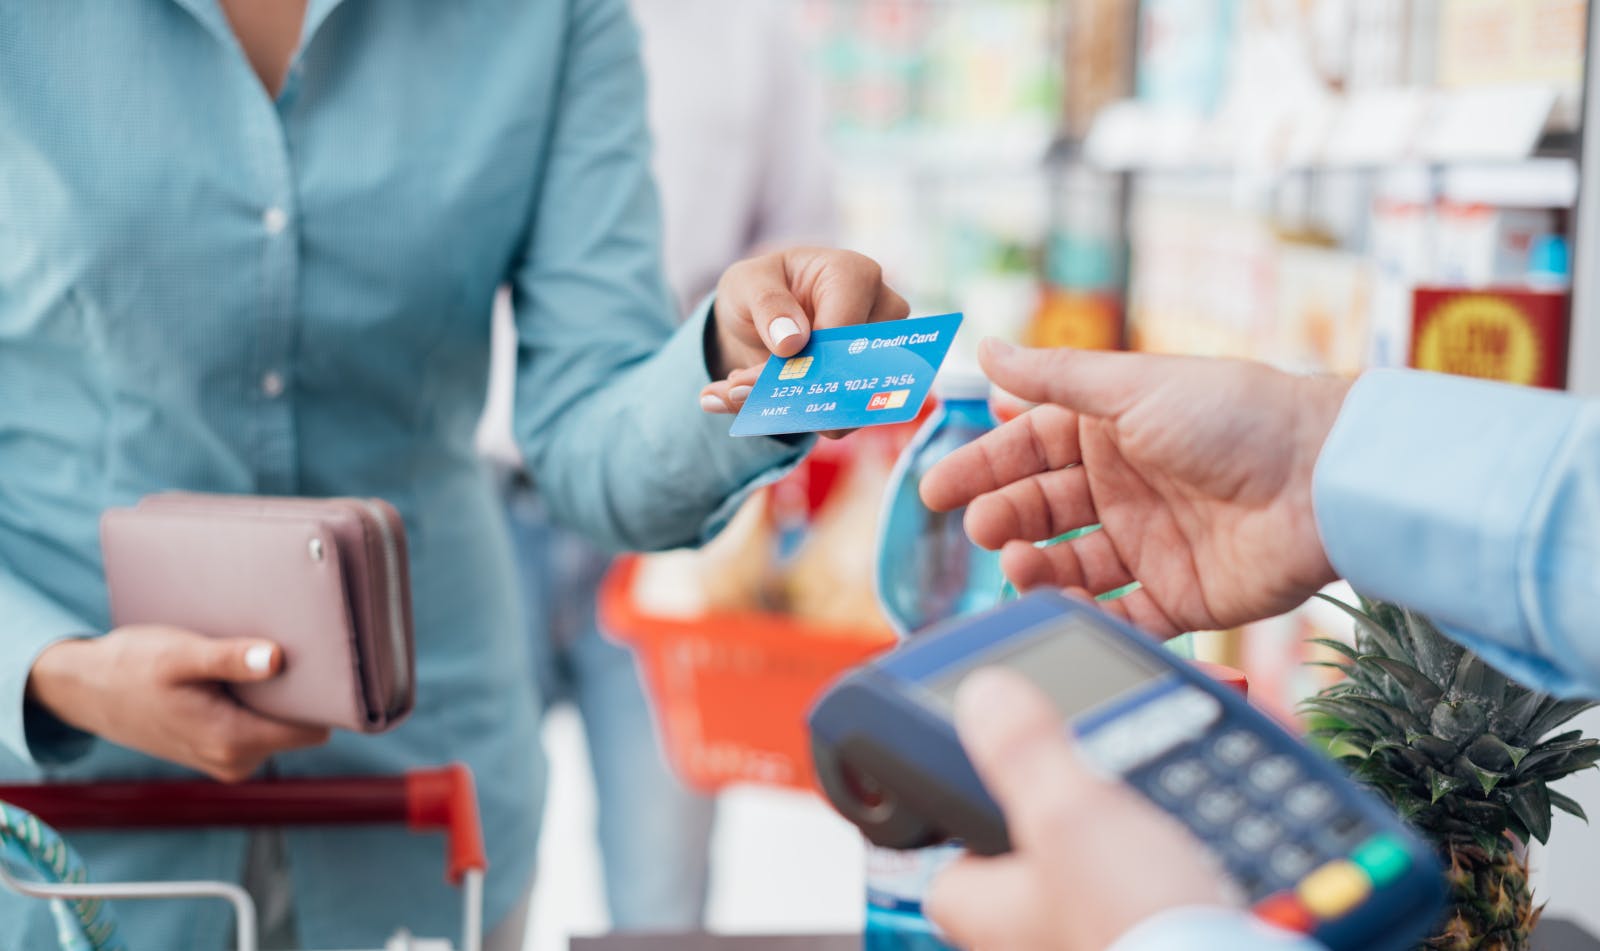 Shopping with a credit card - how to get the best credit card rewards